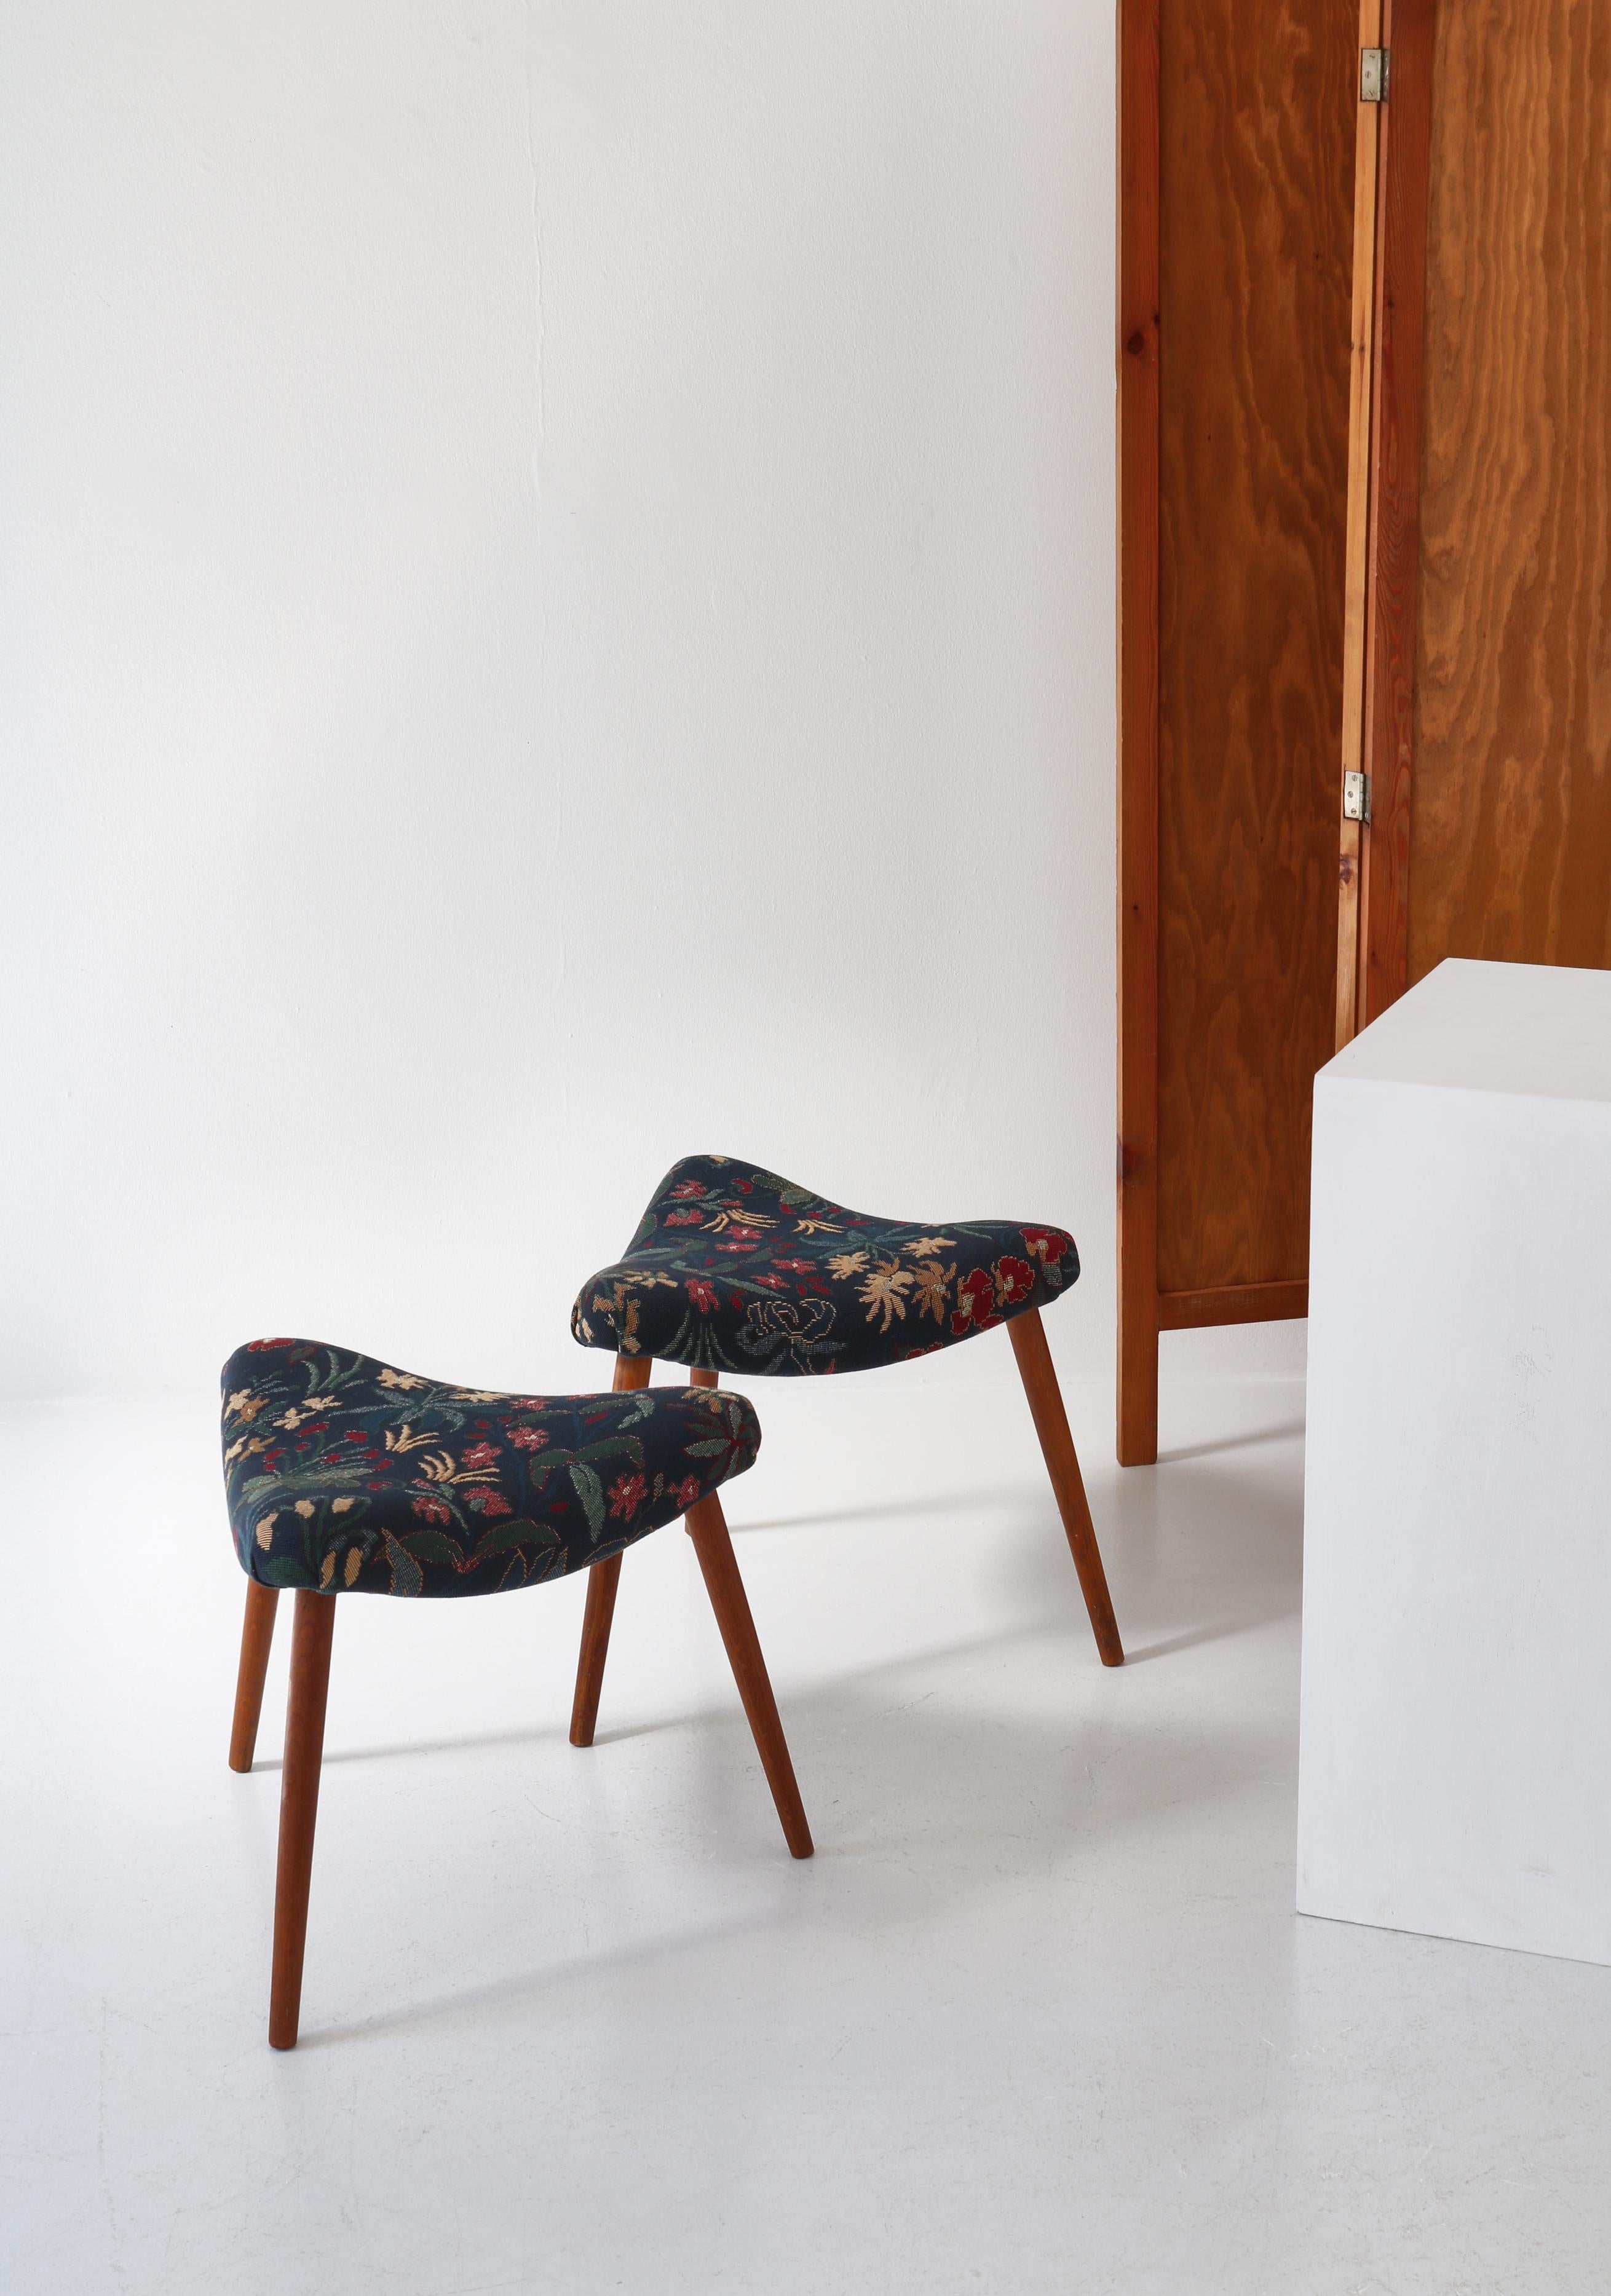 Pair of triangular stools made by a Danish cabinetmaker in the 1950s. The stools are made of an elegant curved wooden frame, that has been reupholstered in unique vintage hand woven tapestry with floral motifs. The legs are made from turned solid